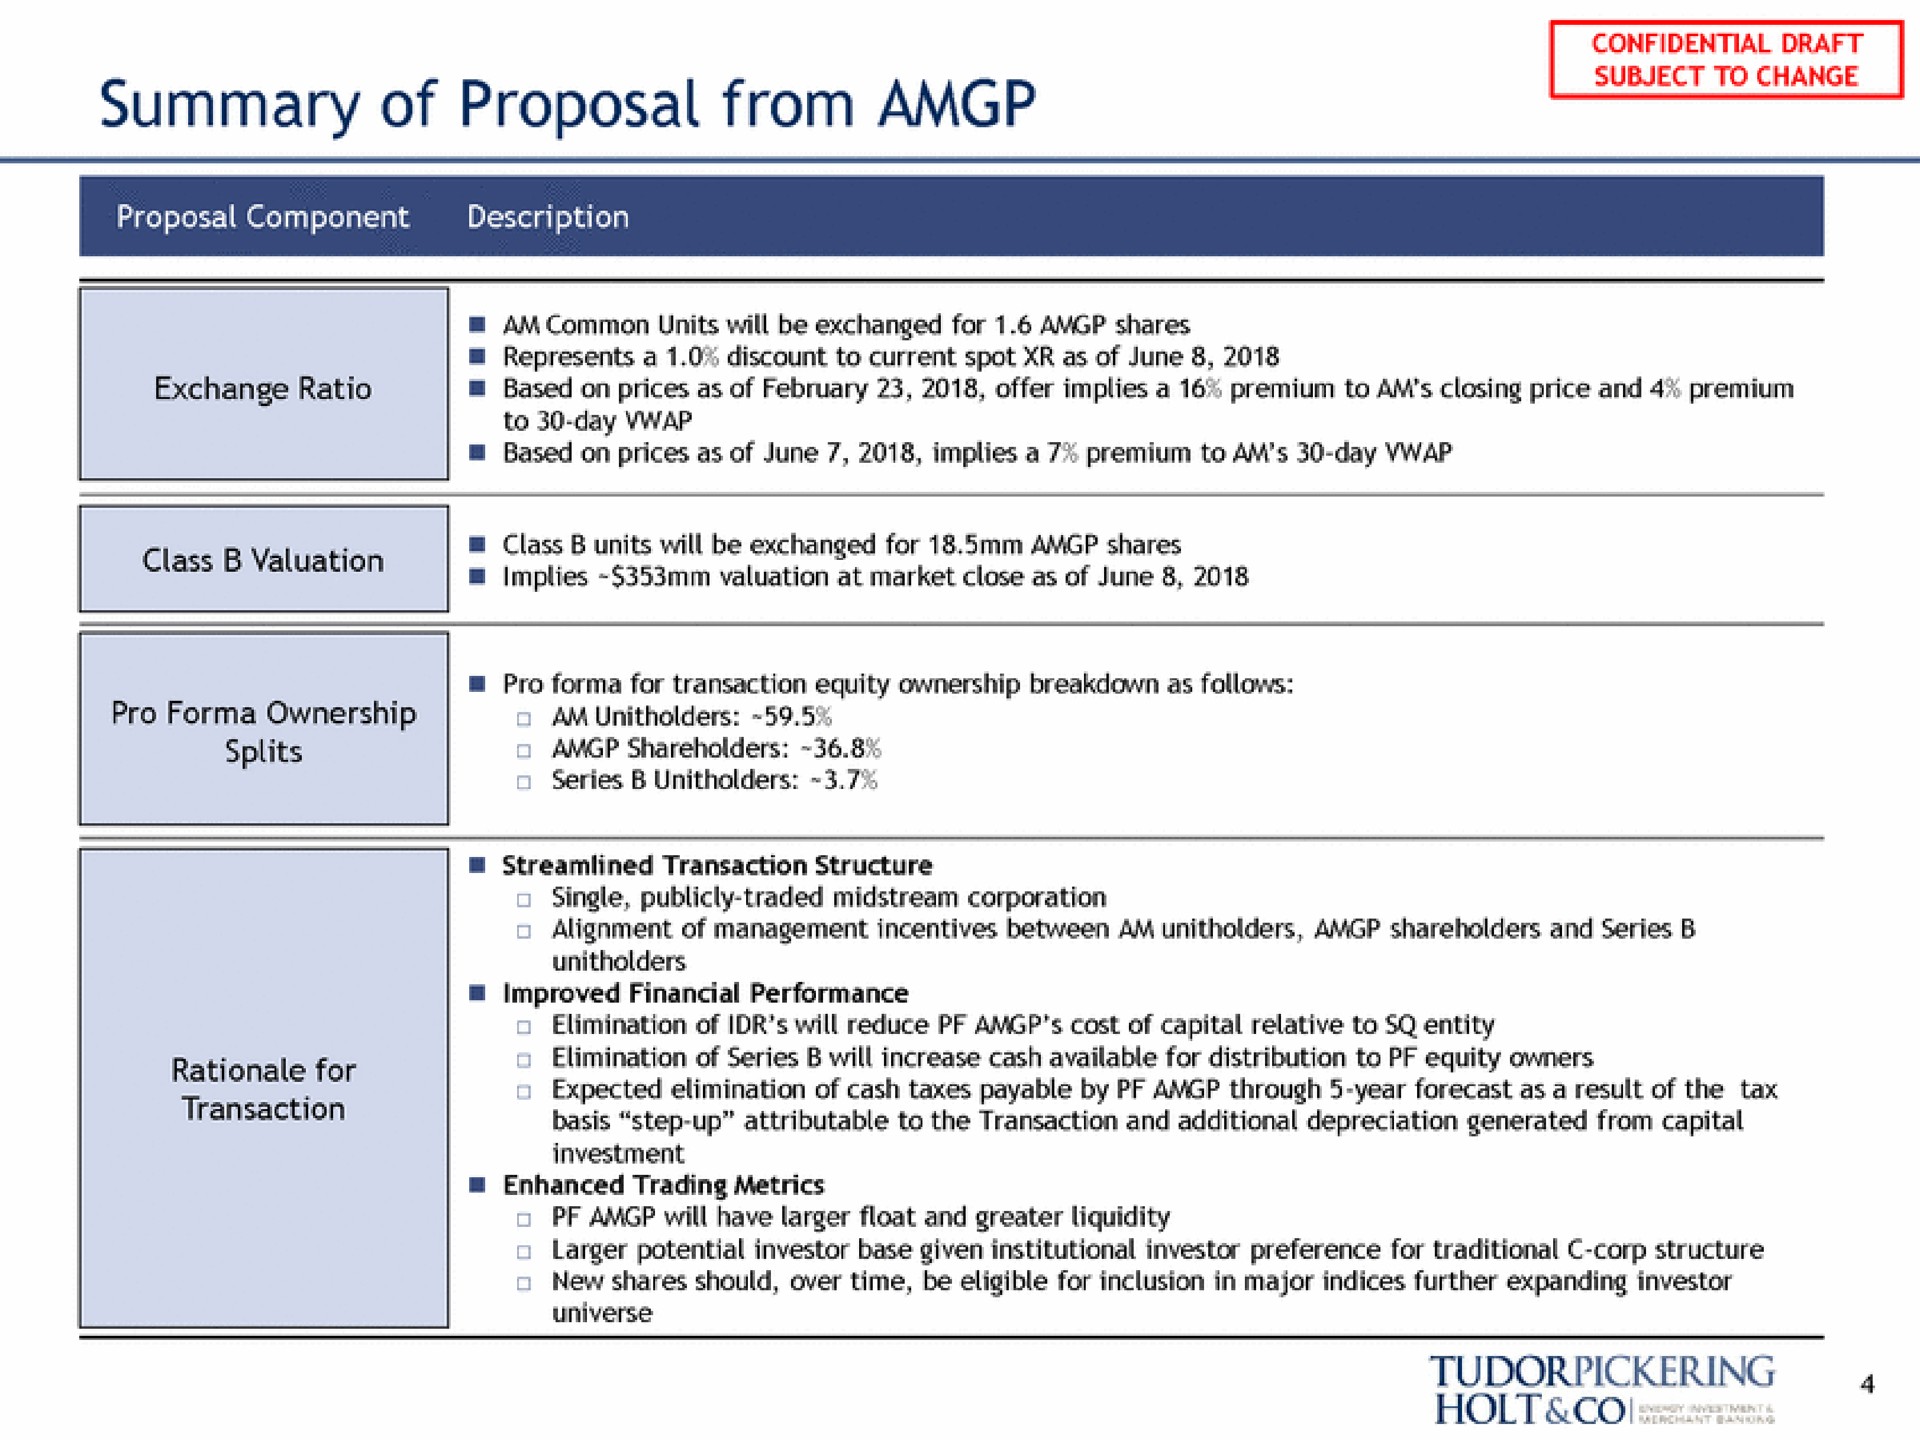 summary of proposal from subject to change holt | Tudor, Pickering, Holt & Co